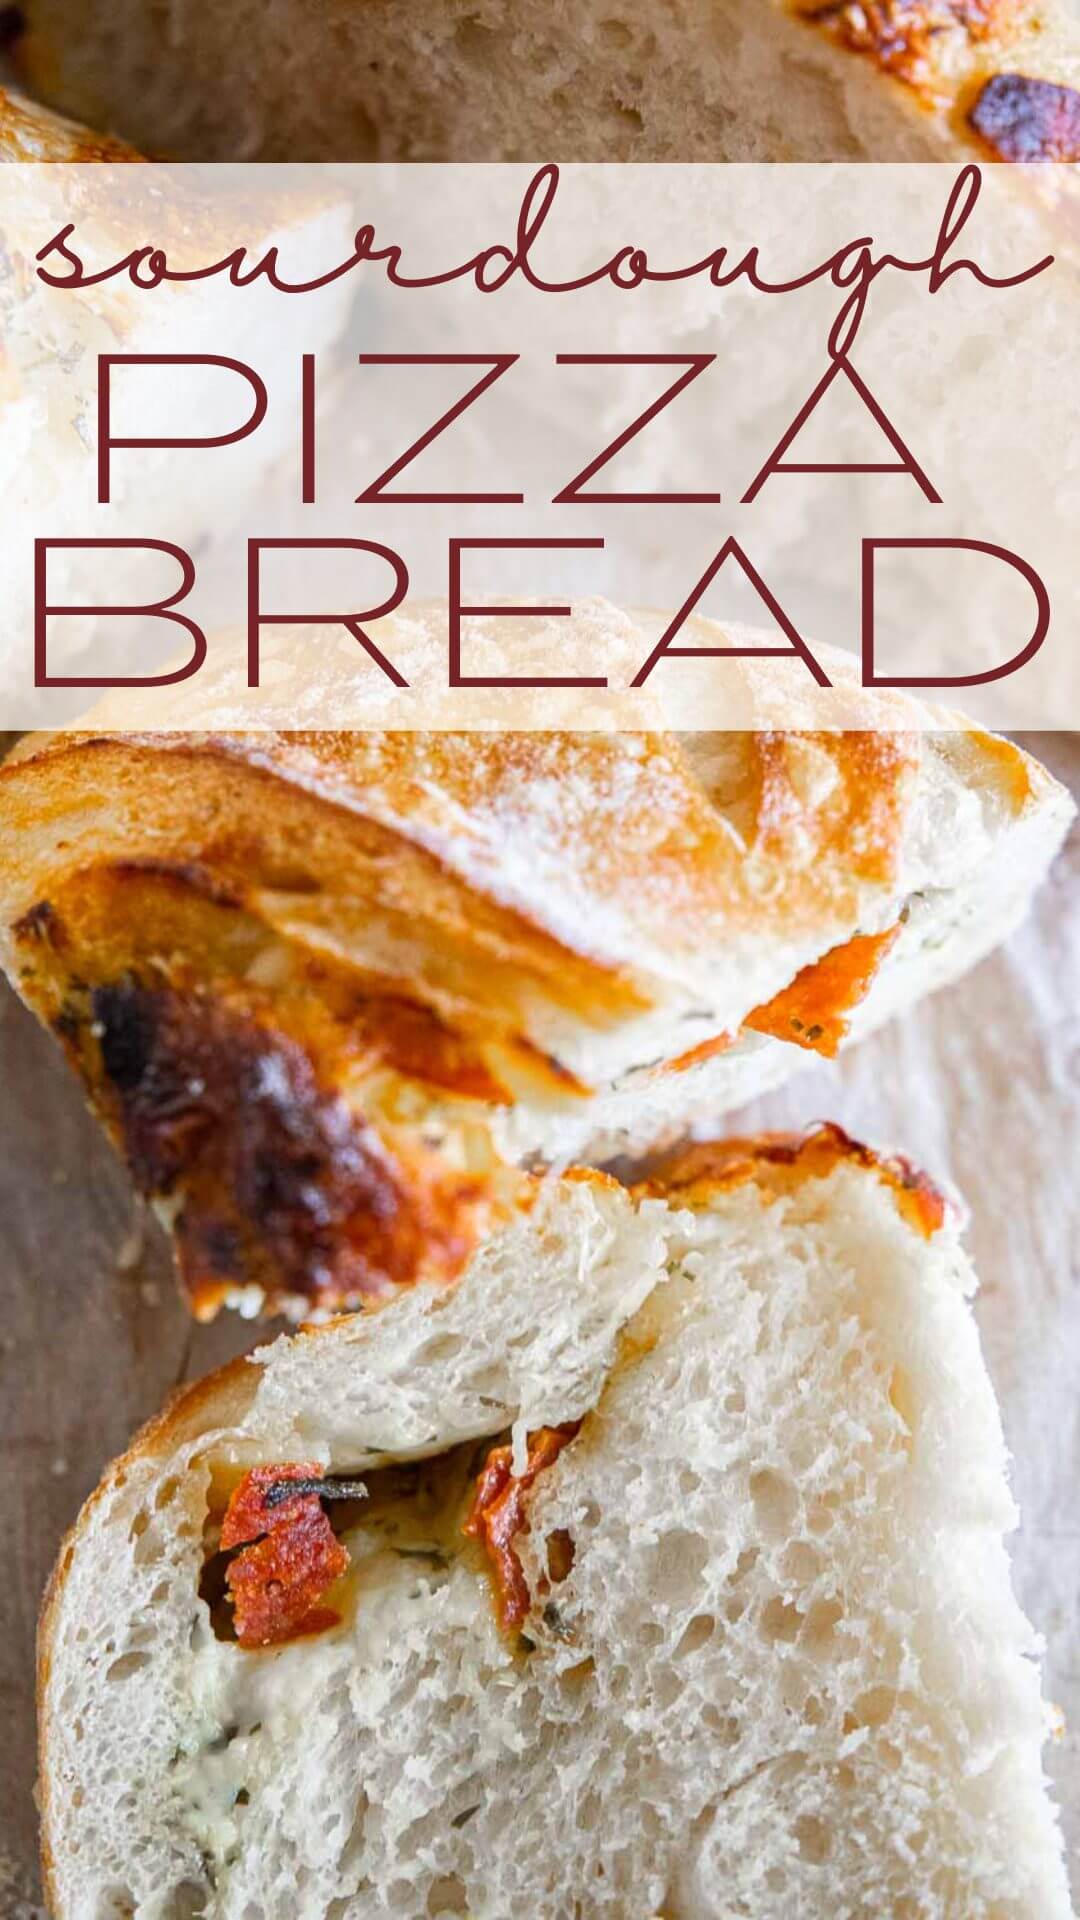 Make this amazing sourdough pizza bread with all the amazing toppings mixed right into the bread! Dip it in marinara sauce for a fun dinner!